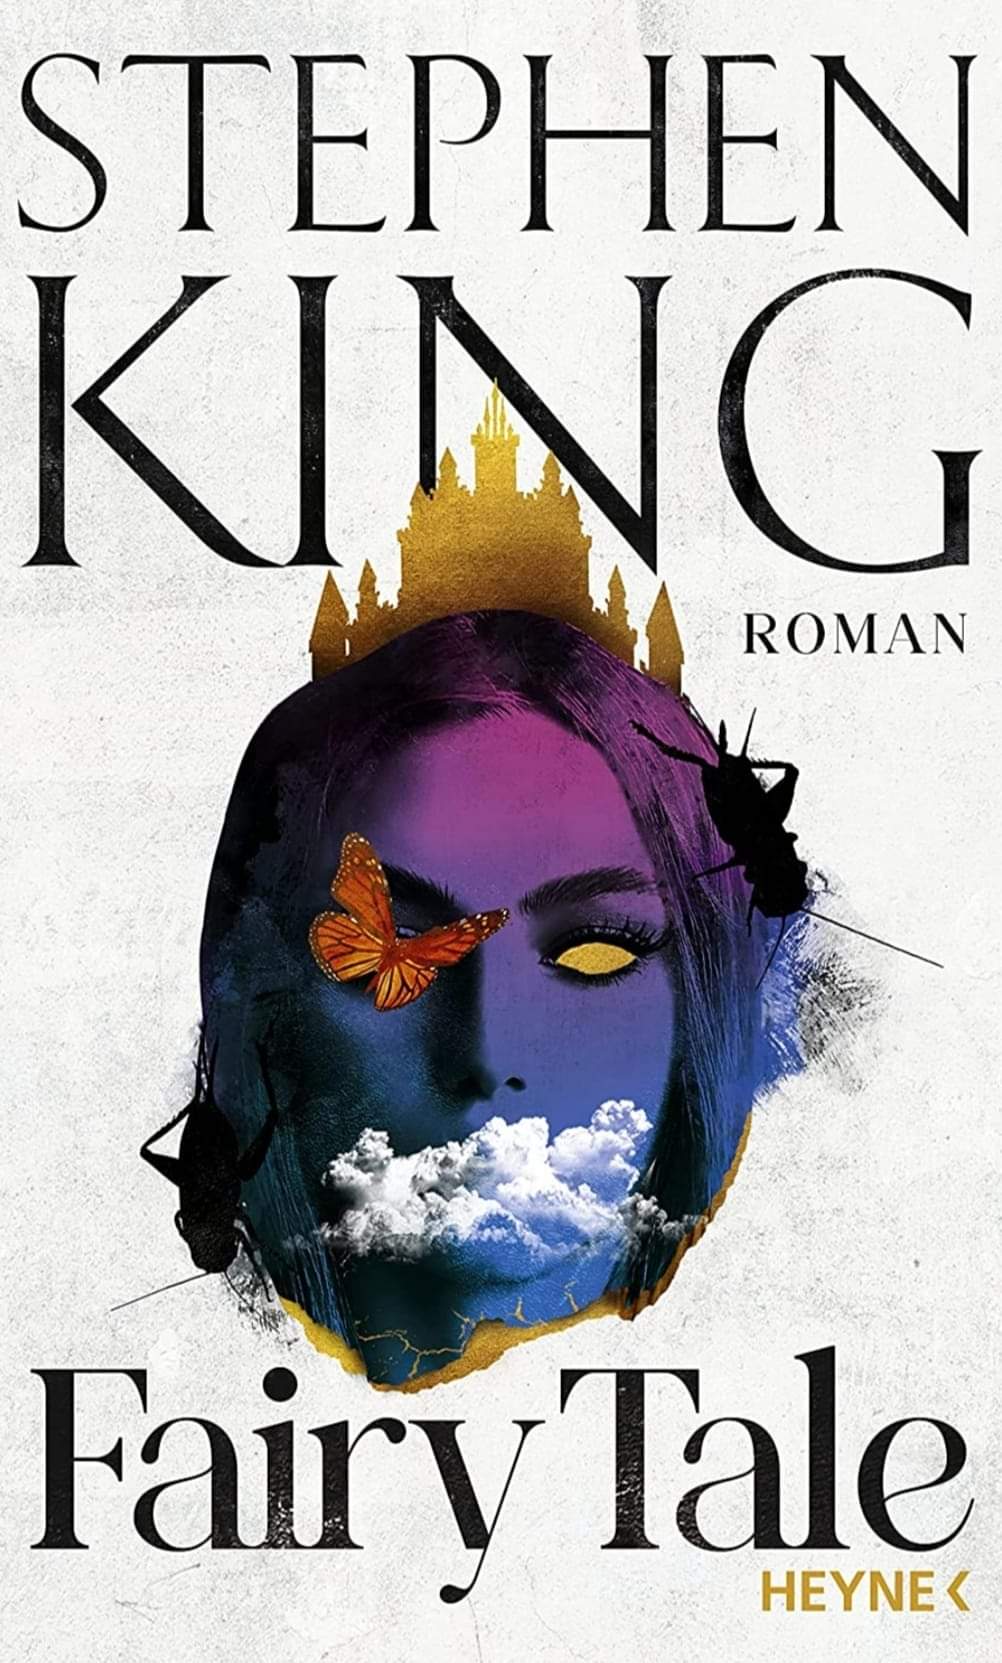 Richard Chizmar on X: GIVEAWAY TIME: I'll pick one lucky random winner  this Sunday night and send them a free signed Stephen King book. All you  have to do is Follow and